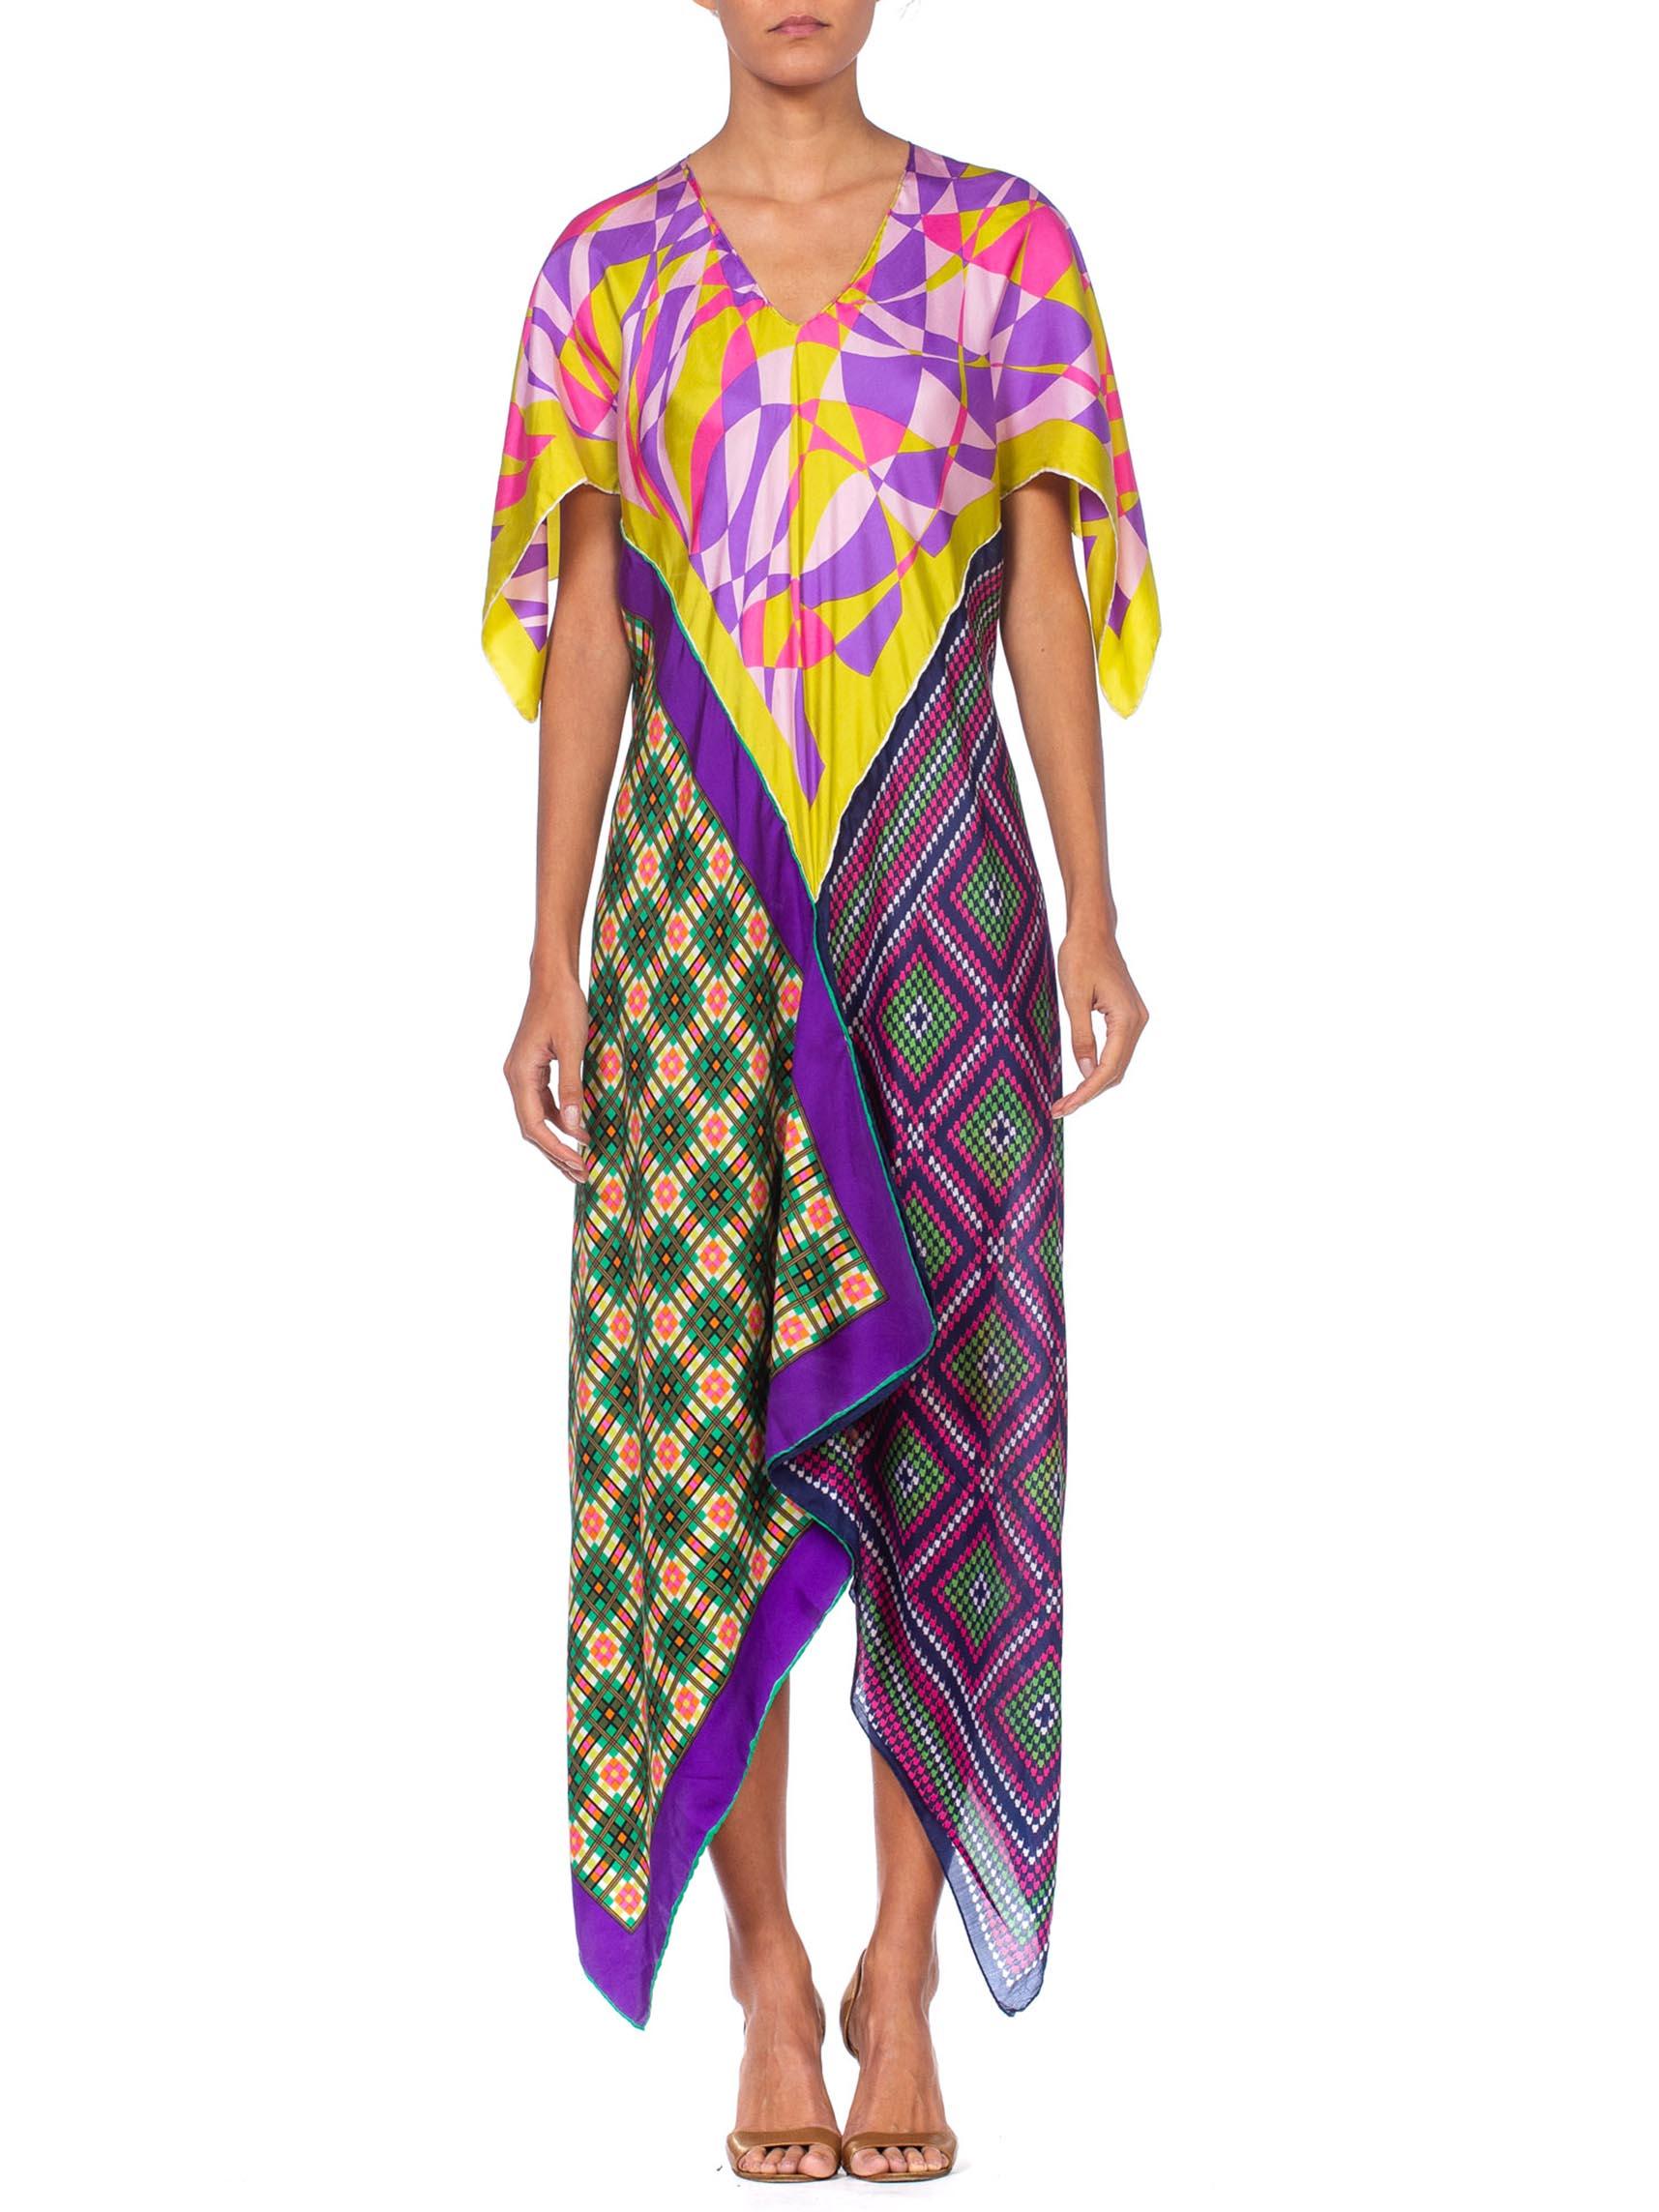 MORPHEW COLLECTION Multicolor Geometric Bias Cut Kaftan  Dress Made From 1960'S Silk Scarves
MORPHEW COLLECTION is made entirely by hand in our NYC Ateliér of rare antique materials sourced from around the globe. Our sustainable vintage materials